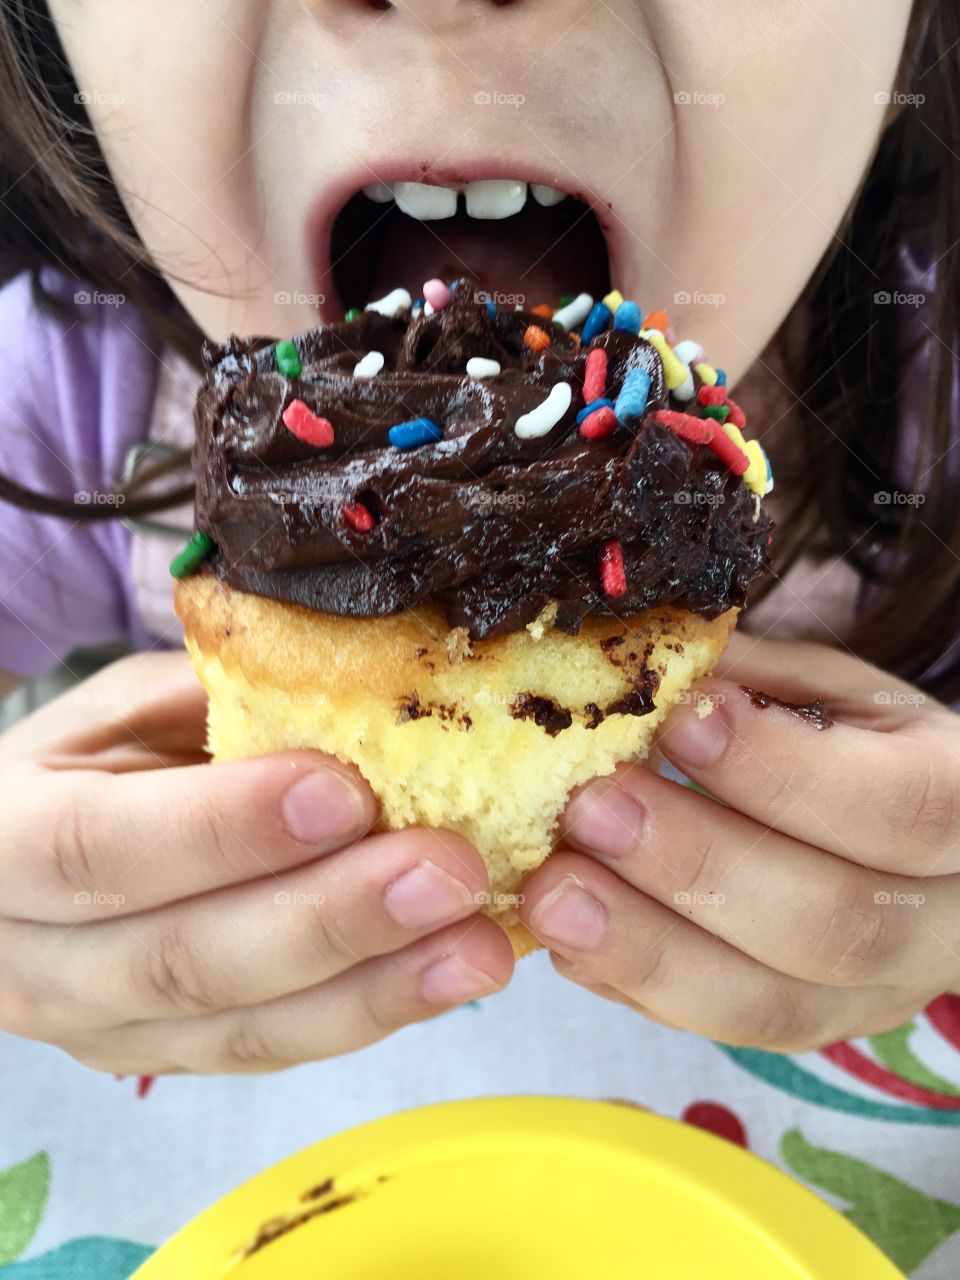 Little girl taking a bite out of a vanilla cupcake with chocolate frosting and rainbow sprinkles 